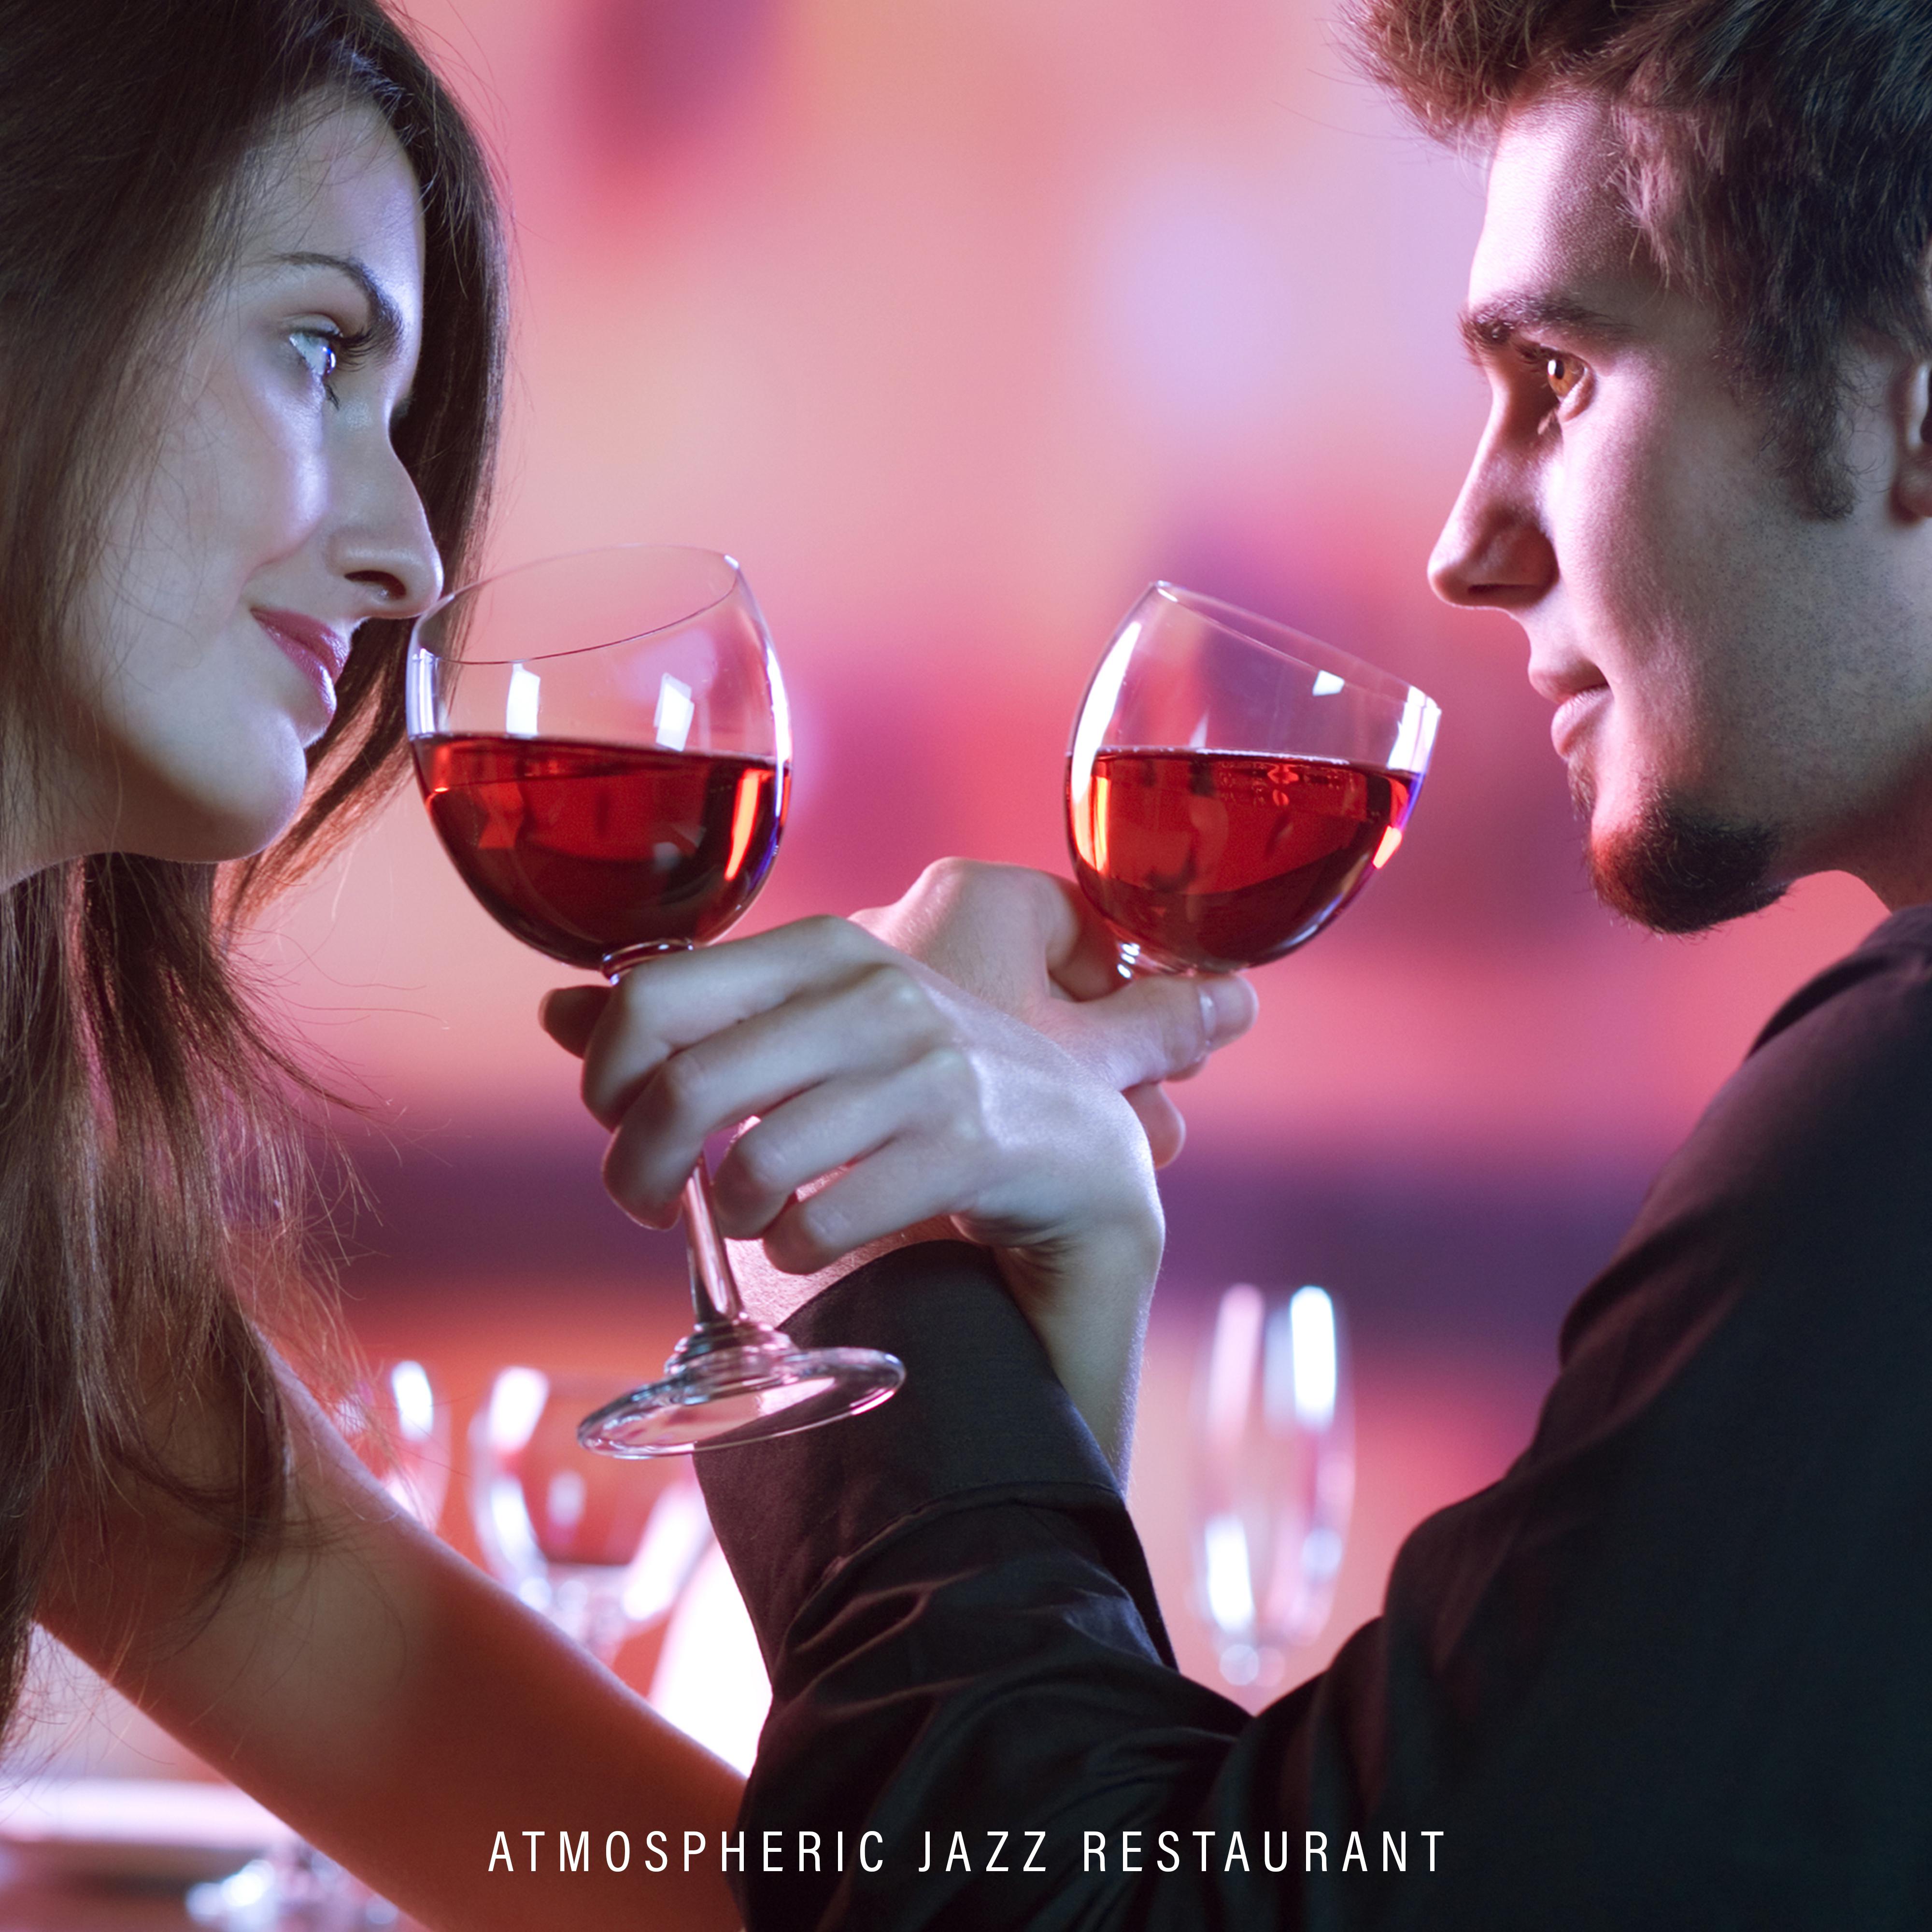 Atmospheric Jazz Restaurant  Selection of Best Smooth Jazz Music in 2019, Jazz Concert in Elegant Restaurant, Perfect Background for Eating Tasty Dishes  Drinking Good Wine